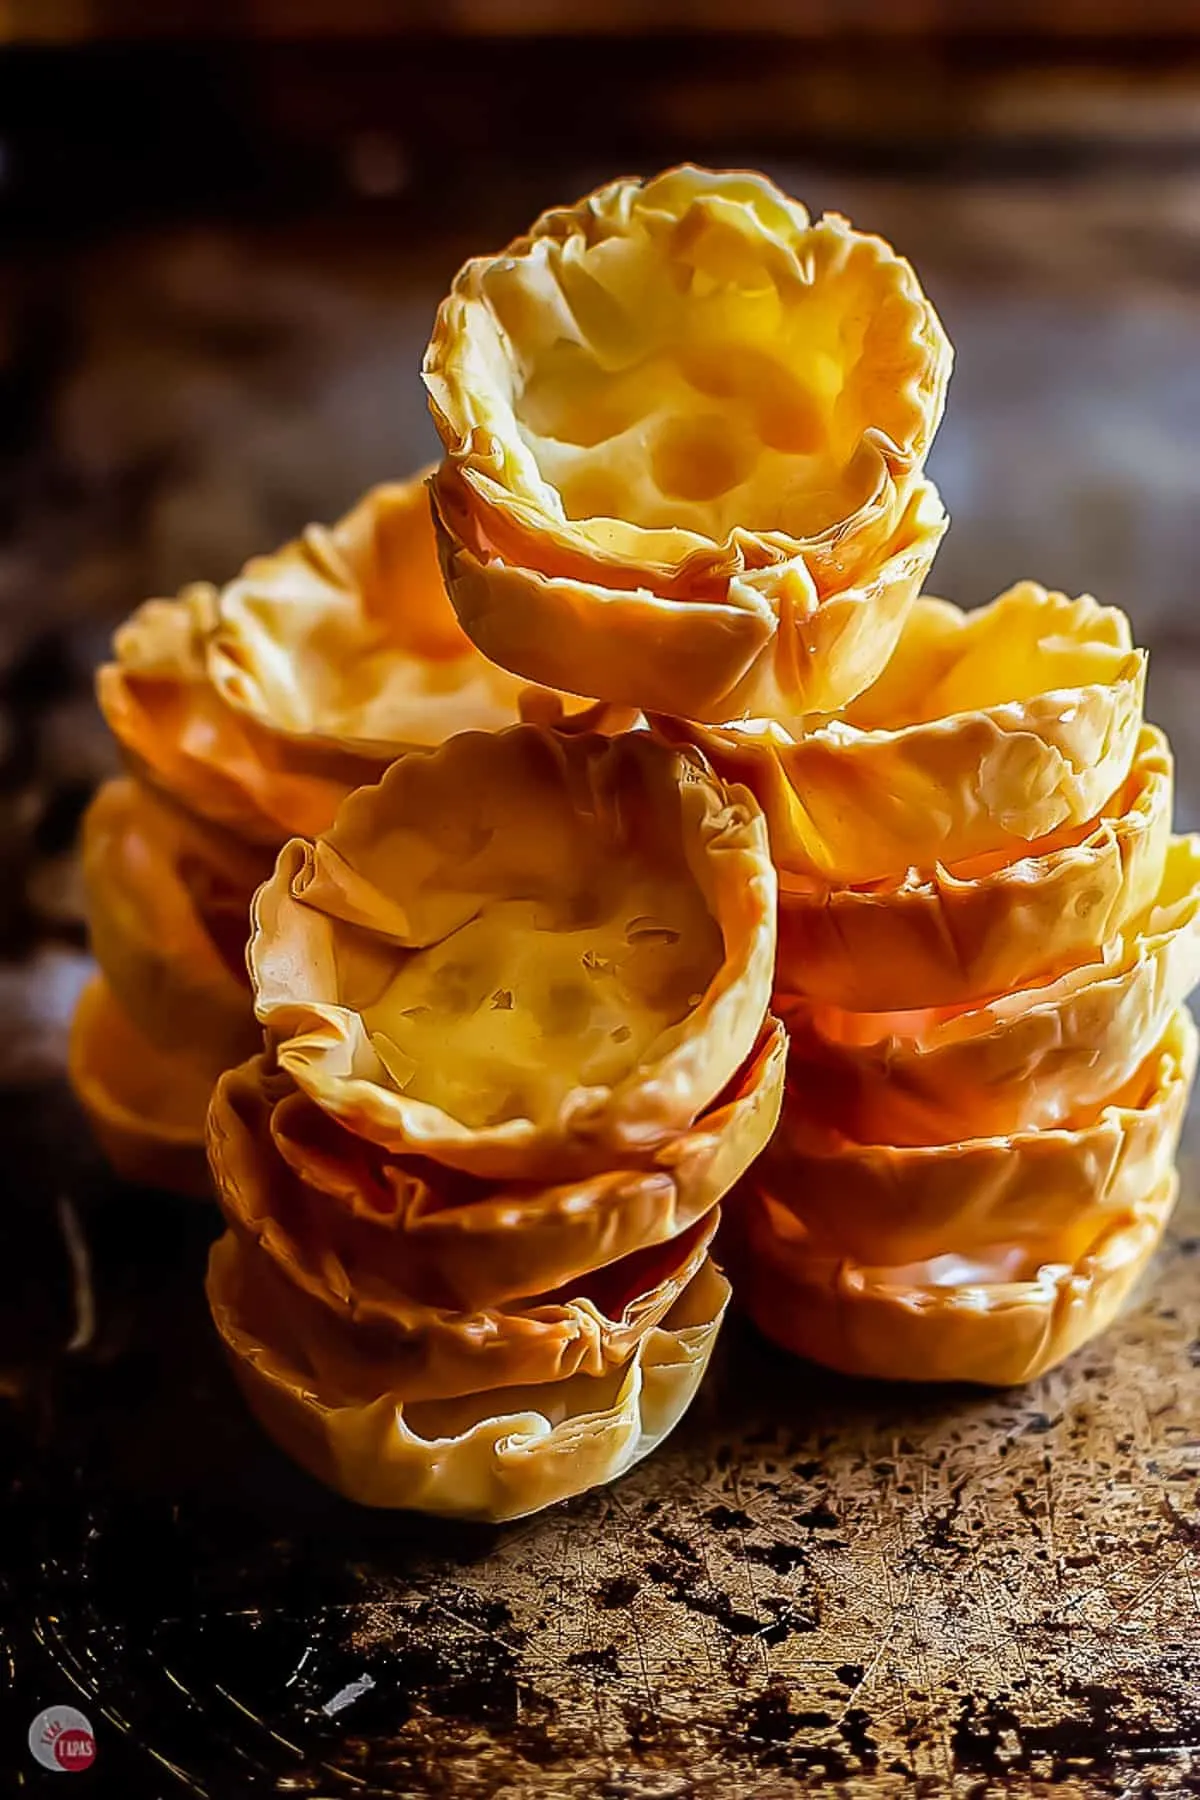 https://www.taketwotapas.com/wp-content/uploads/2021/10/Homemade-Phyllo-Cups-Take-Two-Tapas-9.jpg.webp